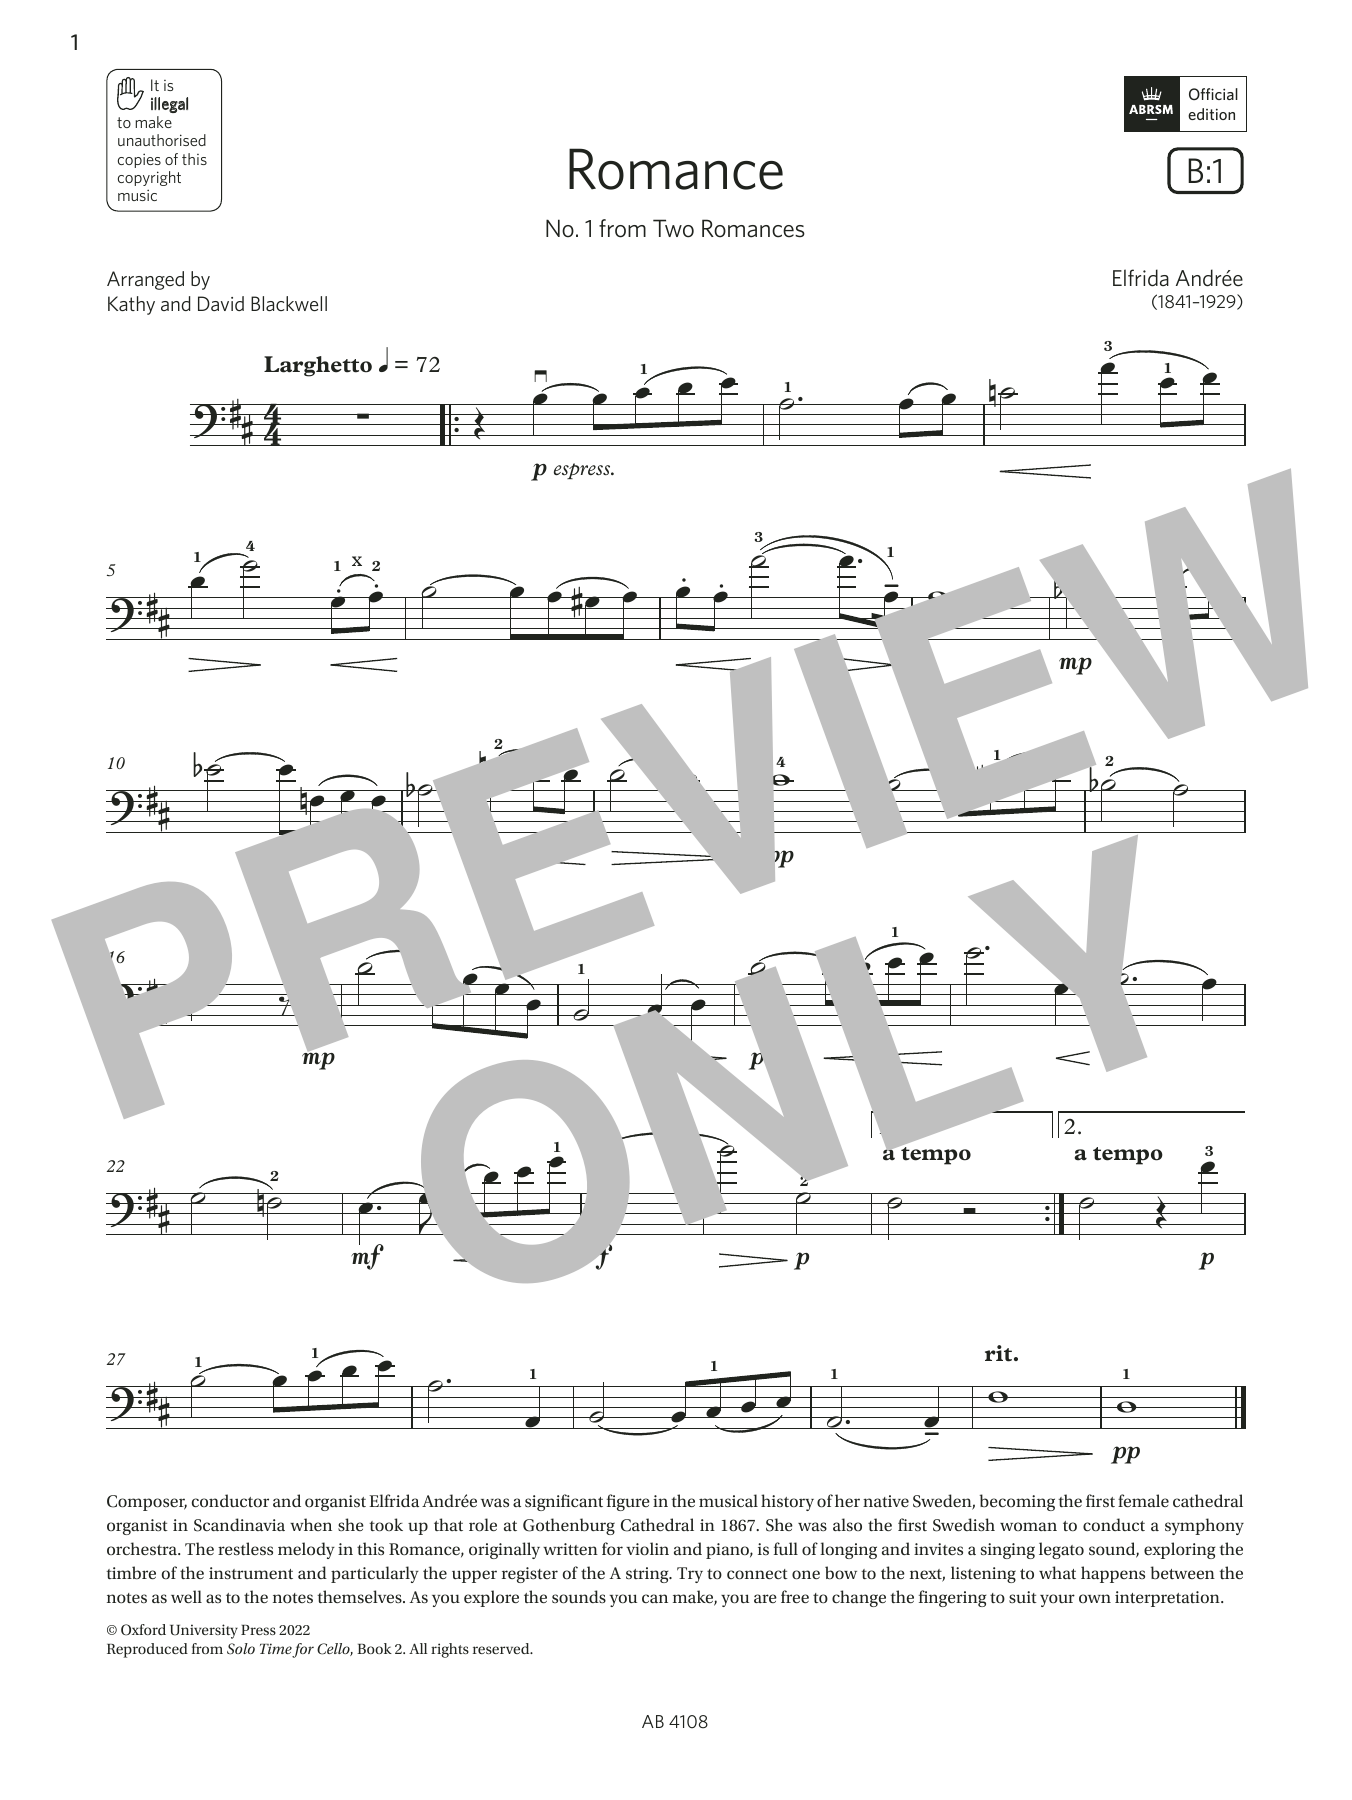 Download Elfrida Andrée Romance No. 1 (Grade 5, B1, from the AB Sheet Music